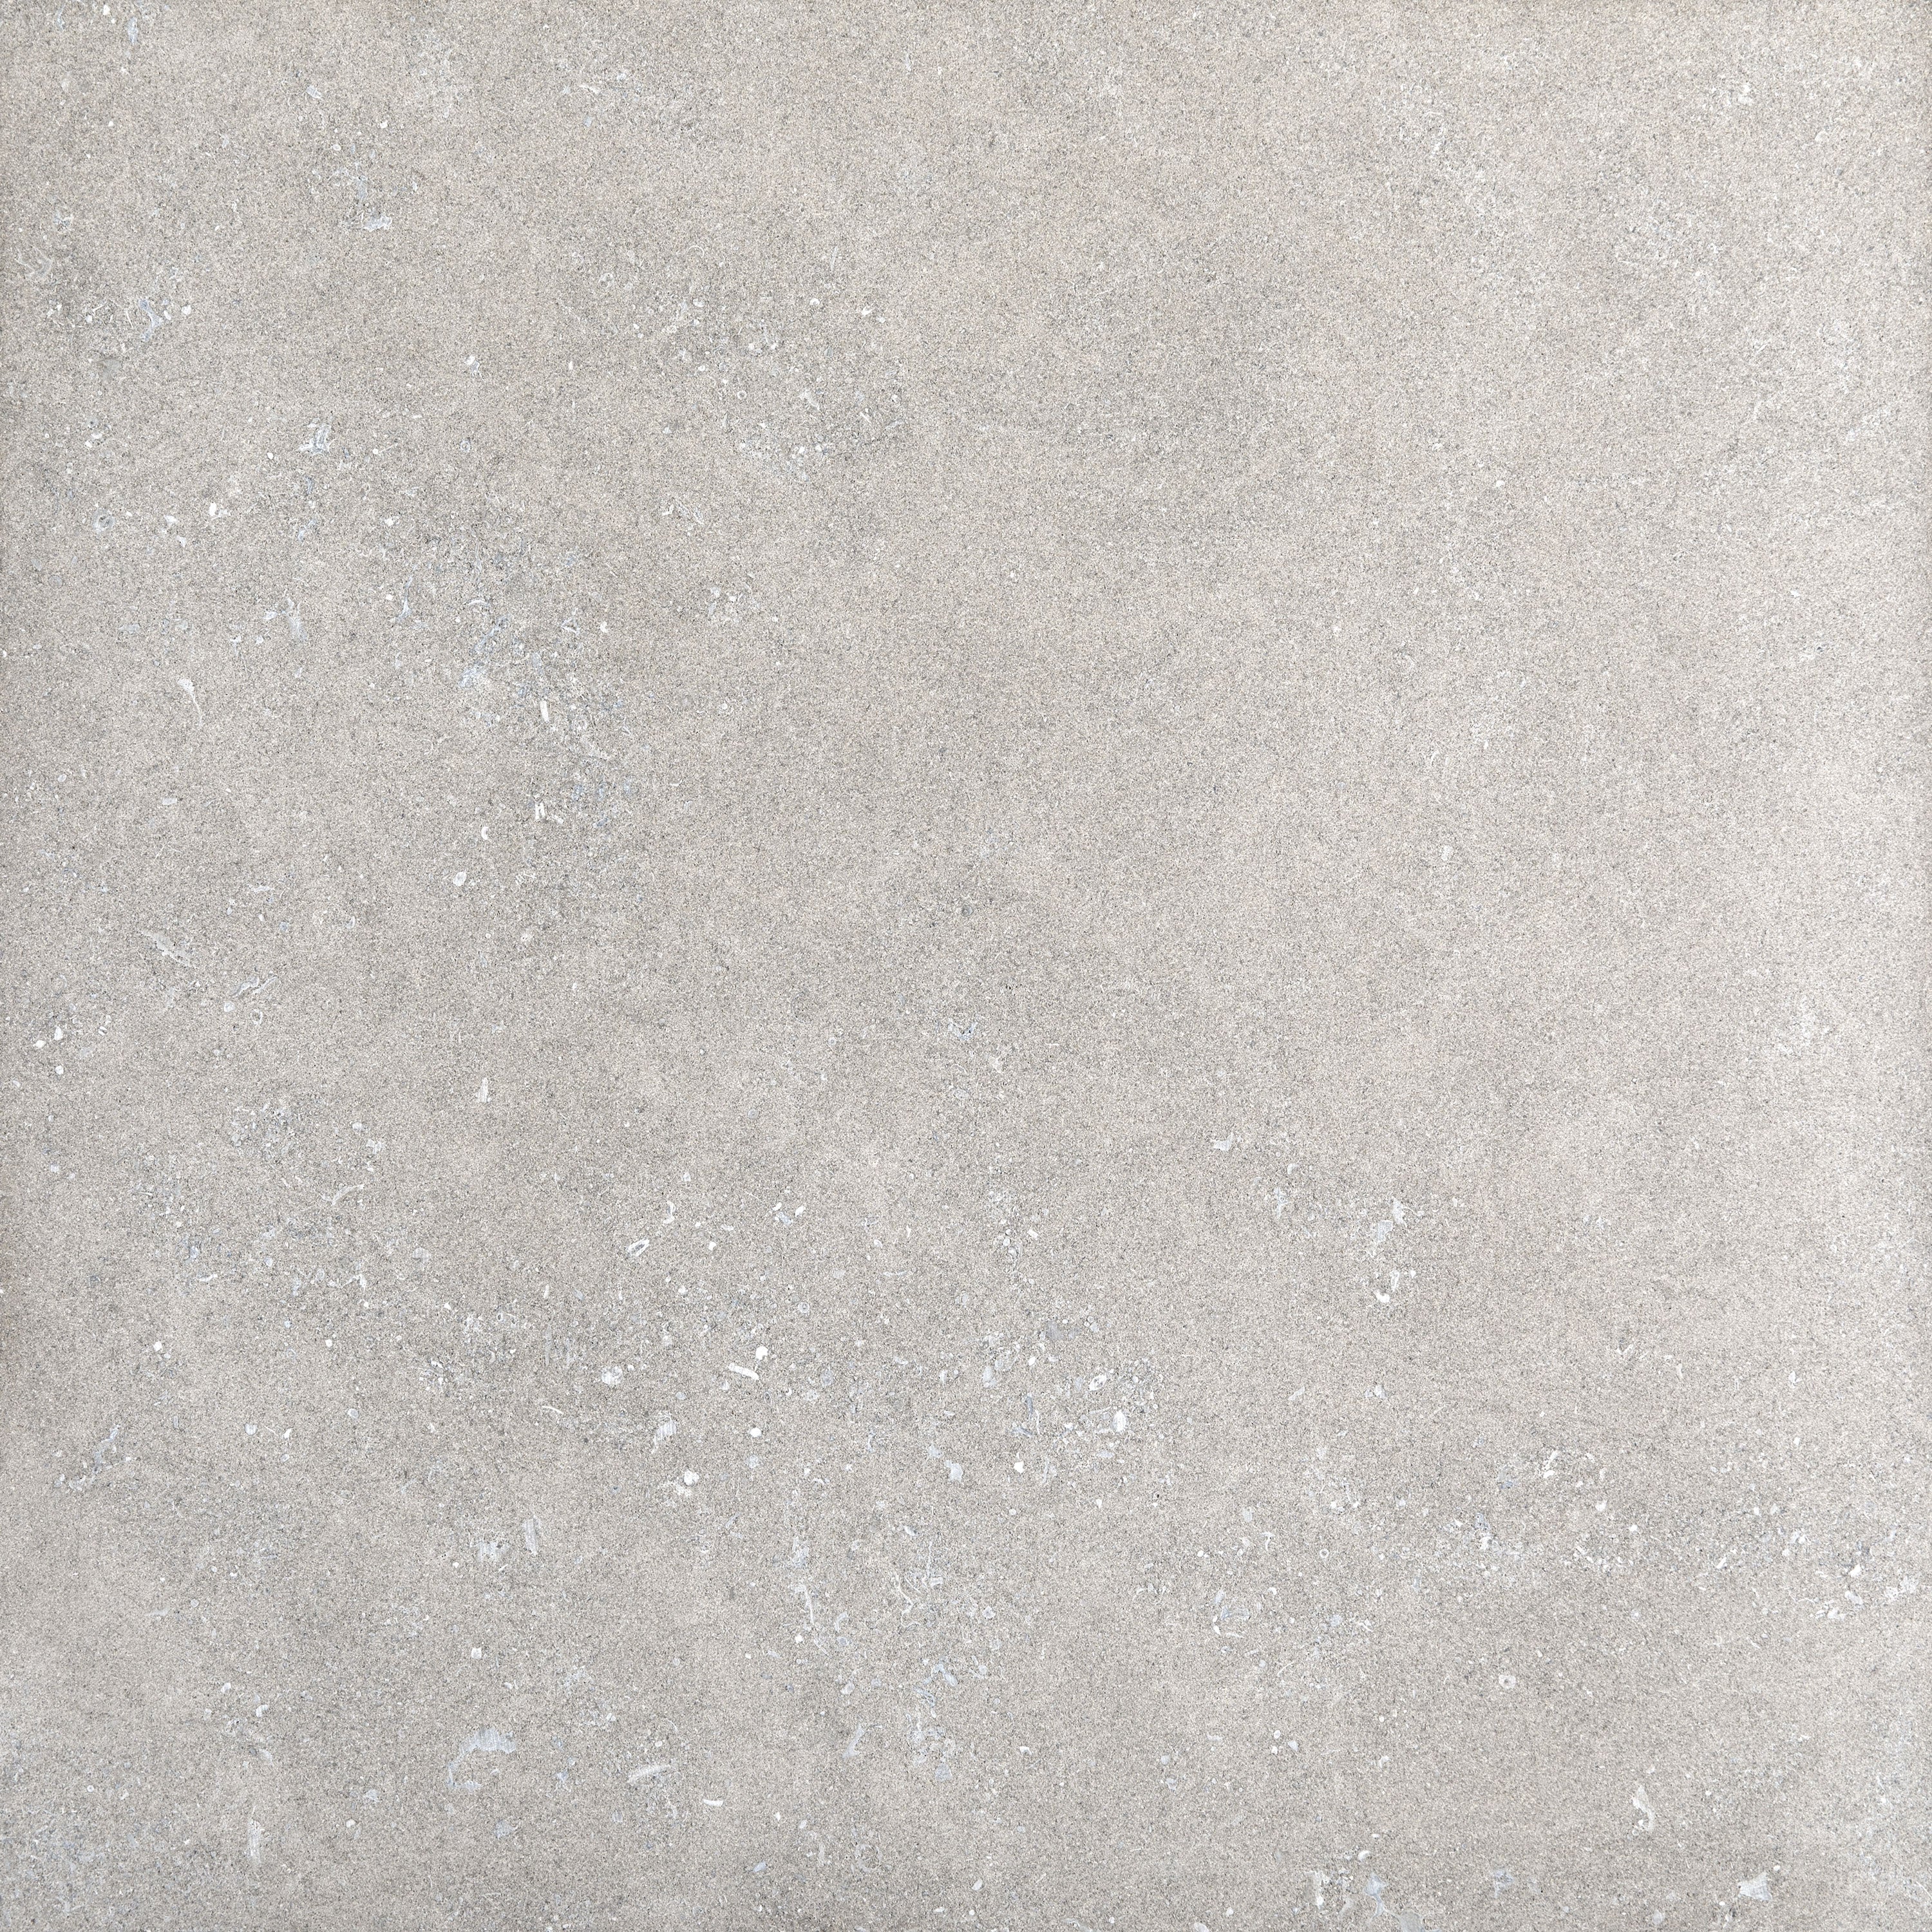 landmark frontier20 limestone indiana variegated paver tile 12x12x20mm matte rectified porcelain tile distributed by surface group international